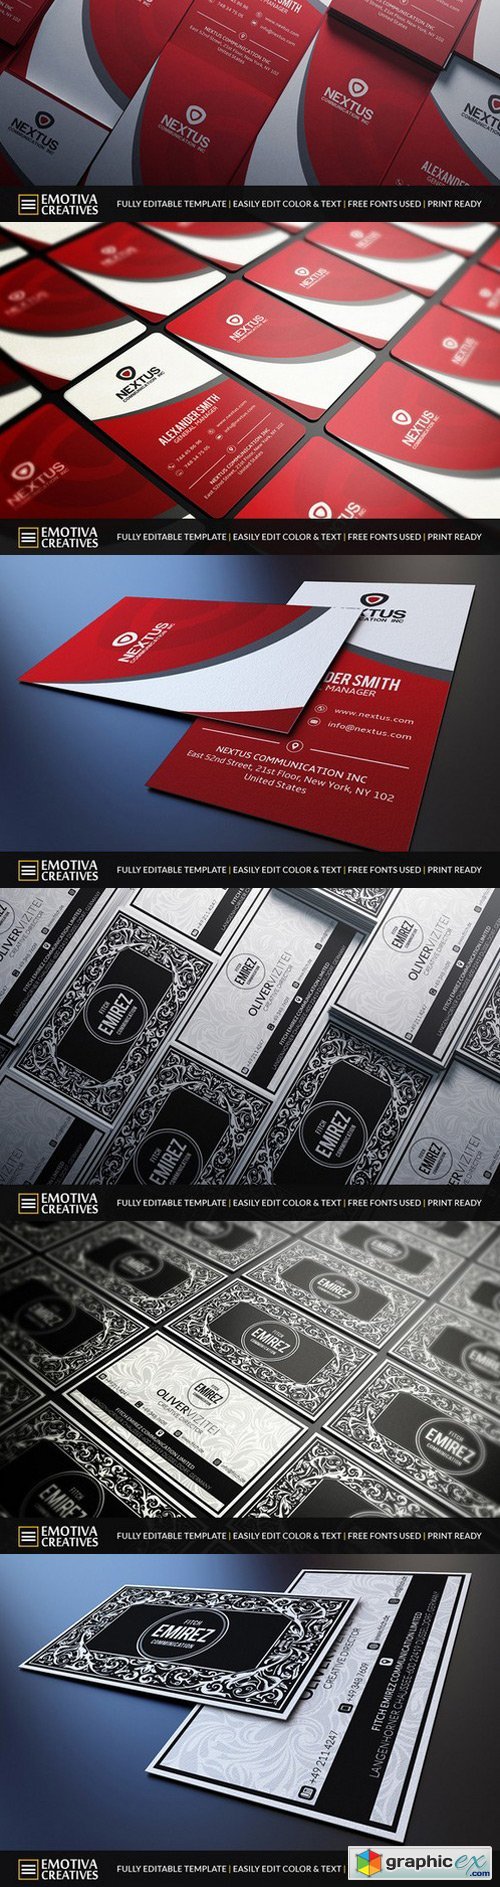 Business Card Bundle 5 In 1